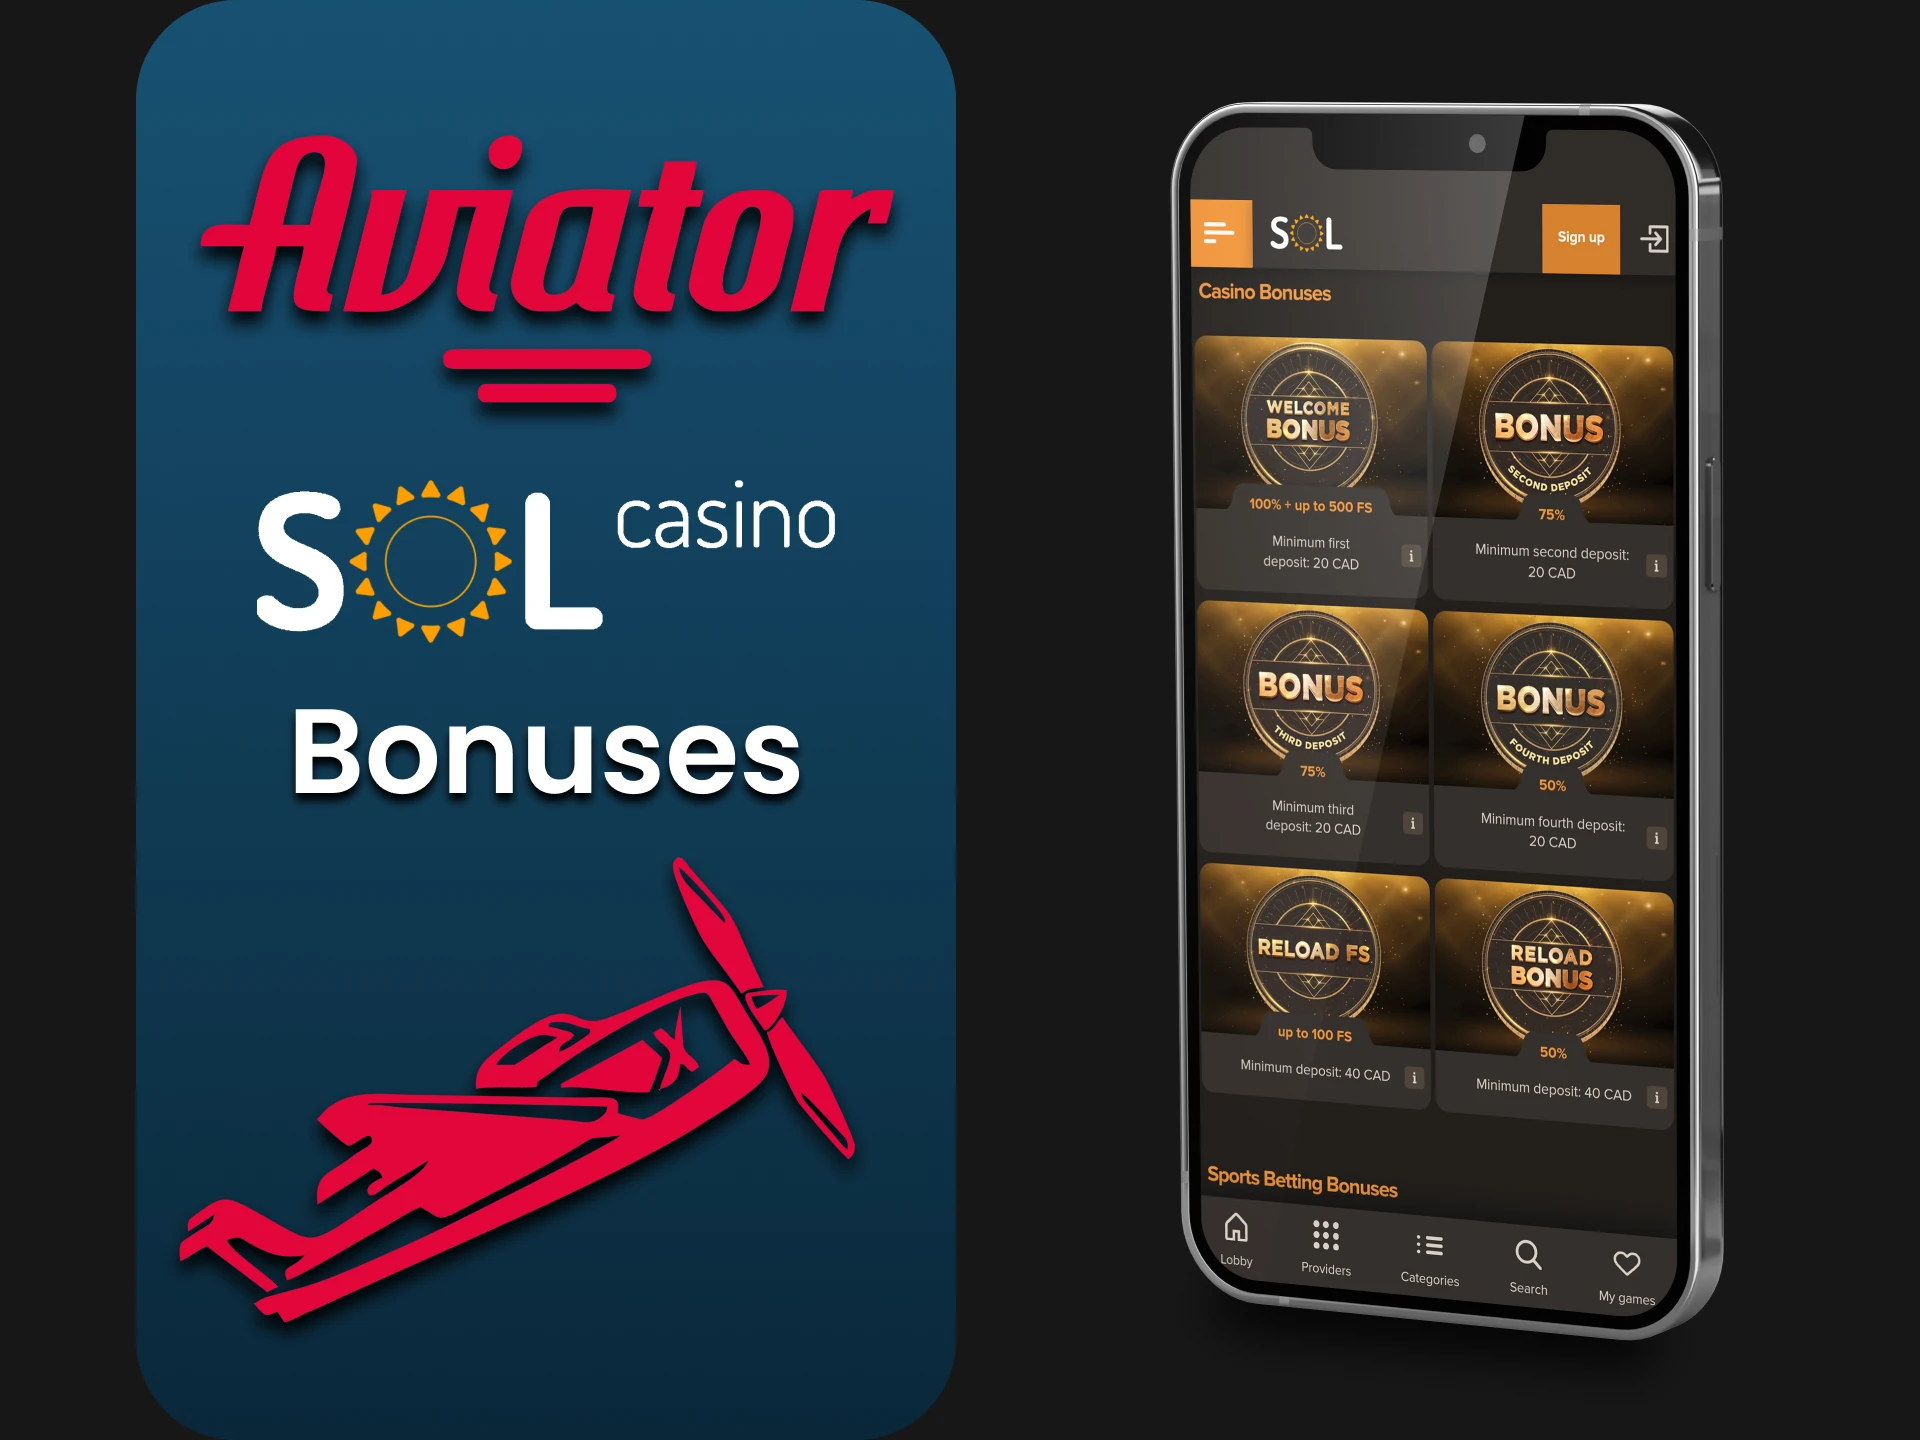 The Sol Casino application gives bonuses for the Aviator game.